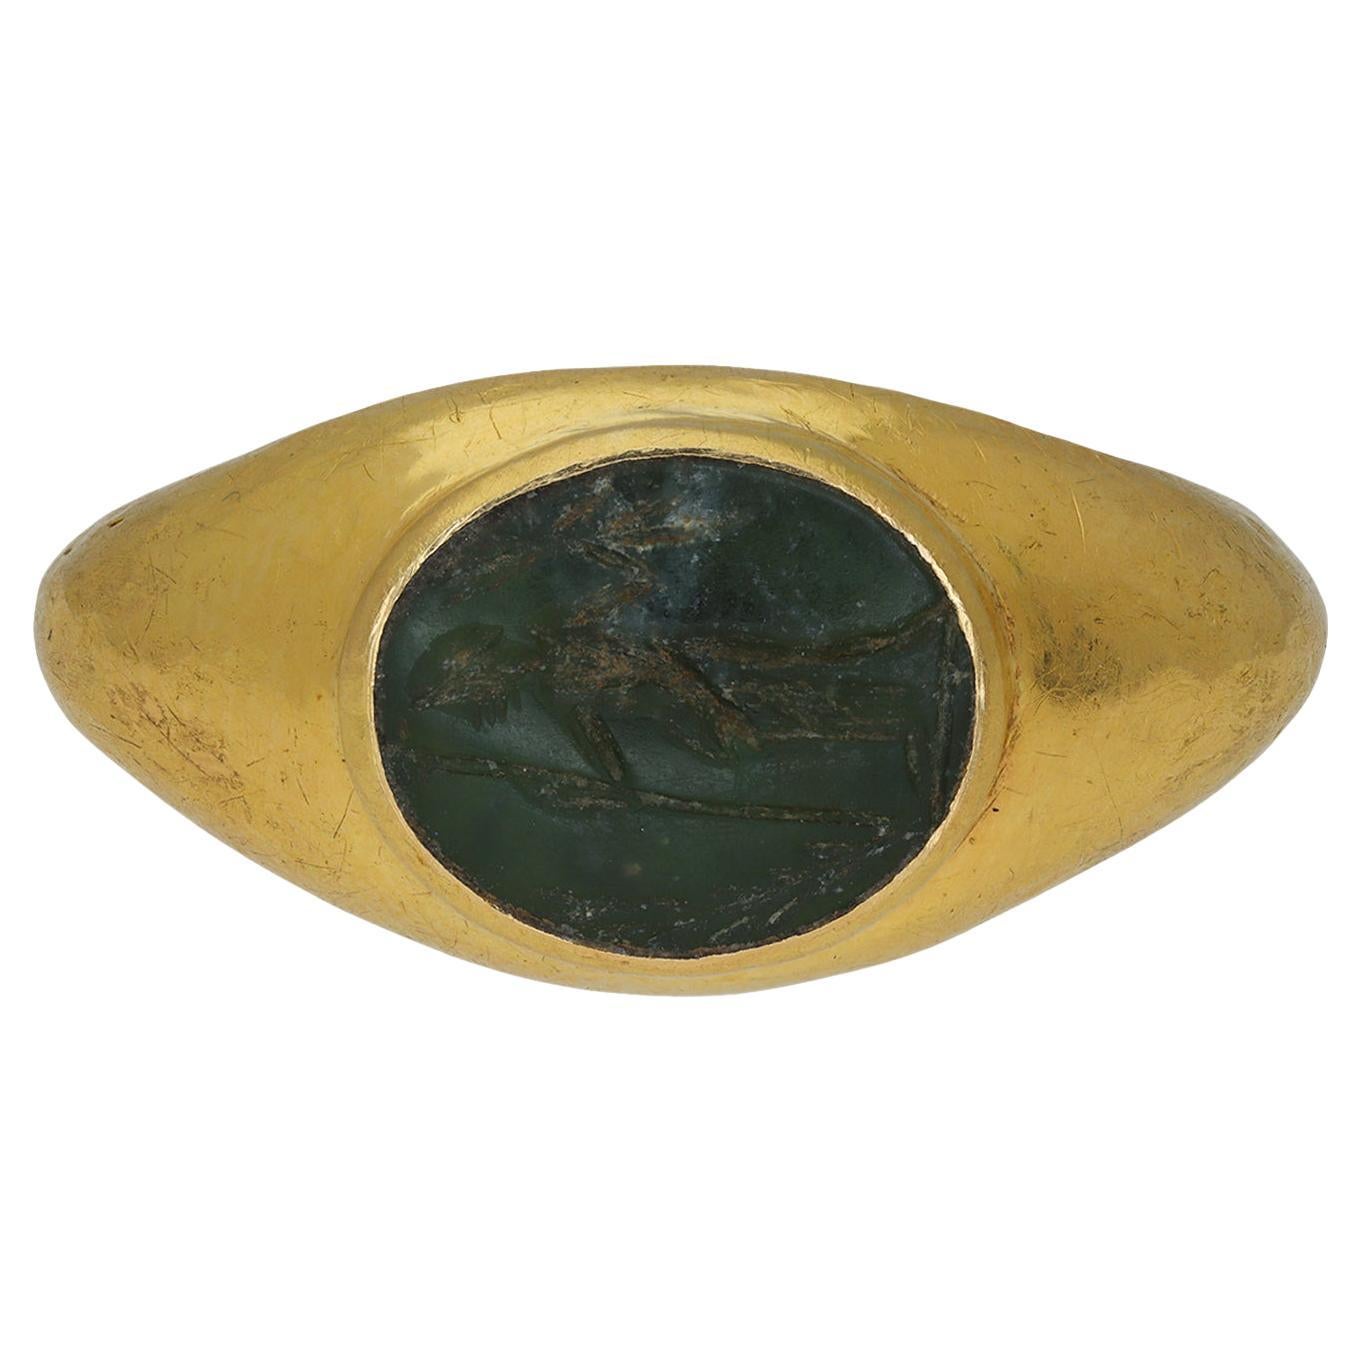 Ancient Roman Ring, 300-200 BC | 0056 | A. Tyner Antiques